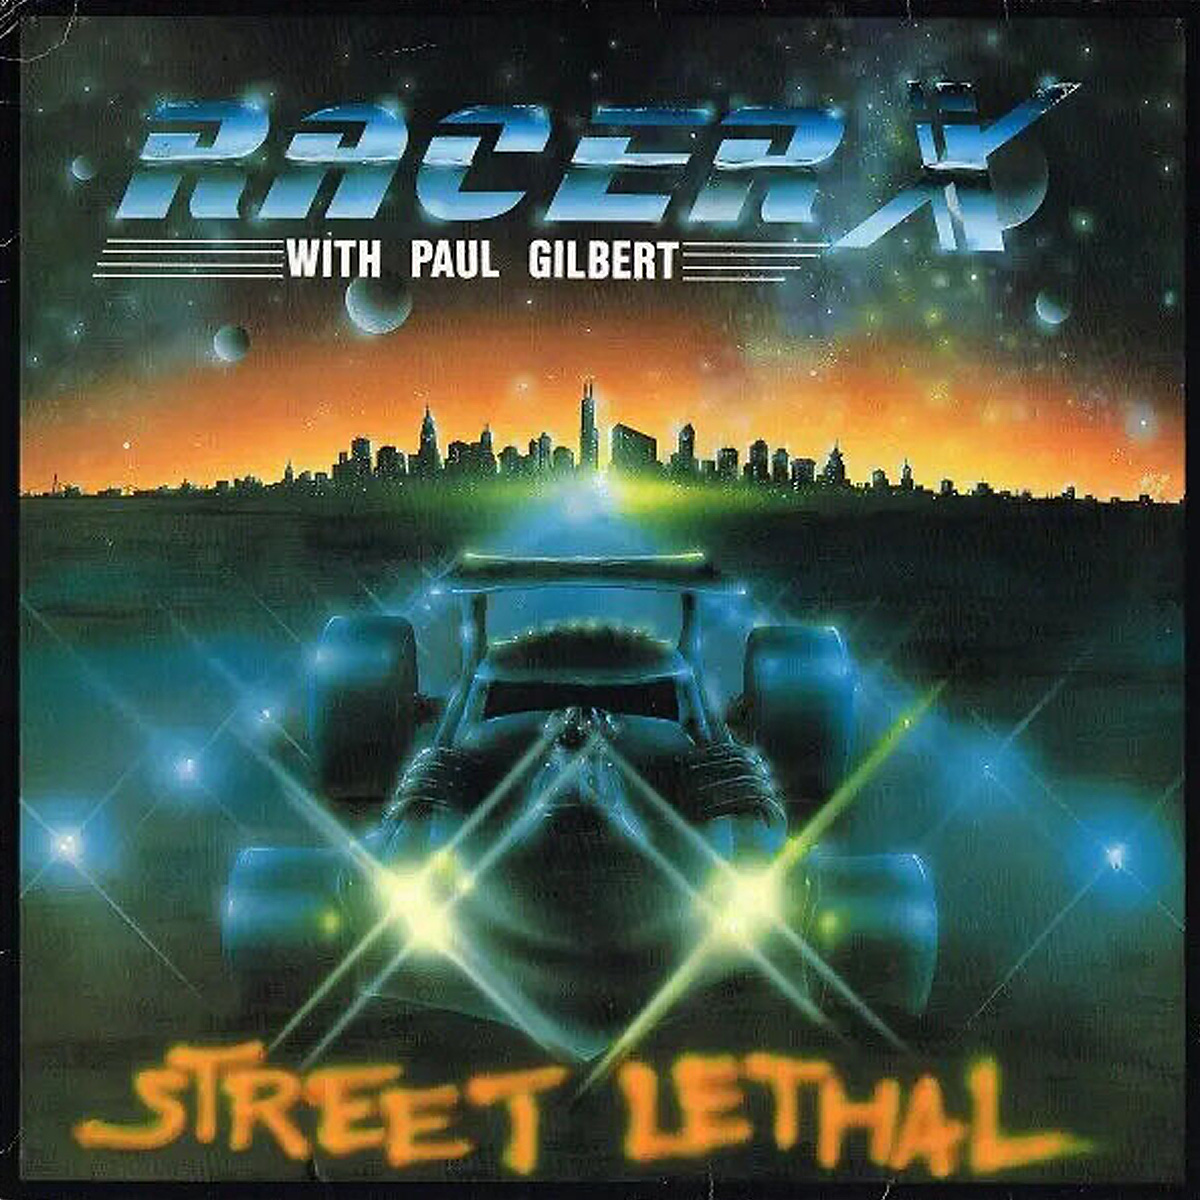 Street Lethal cd cover